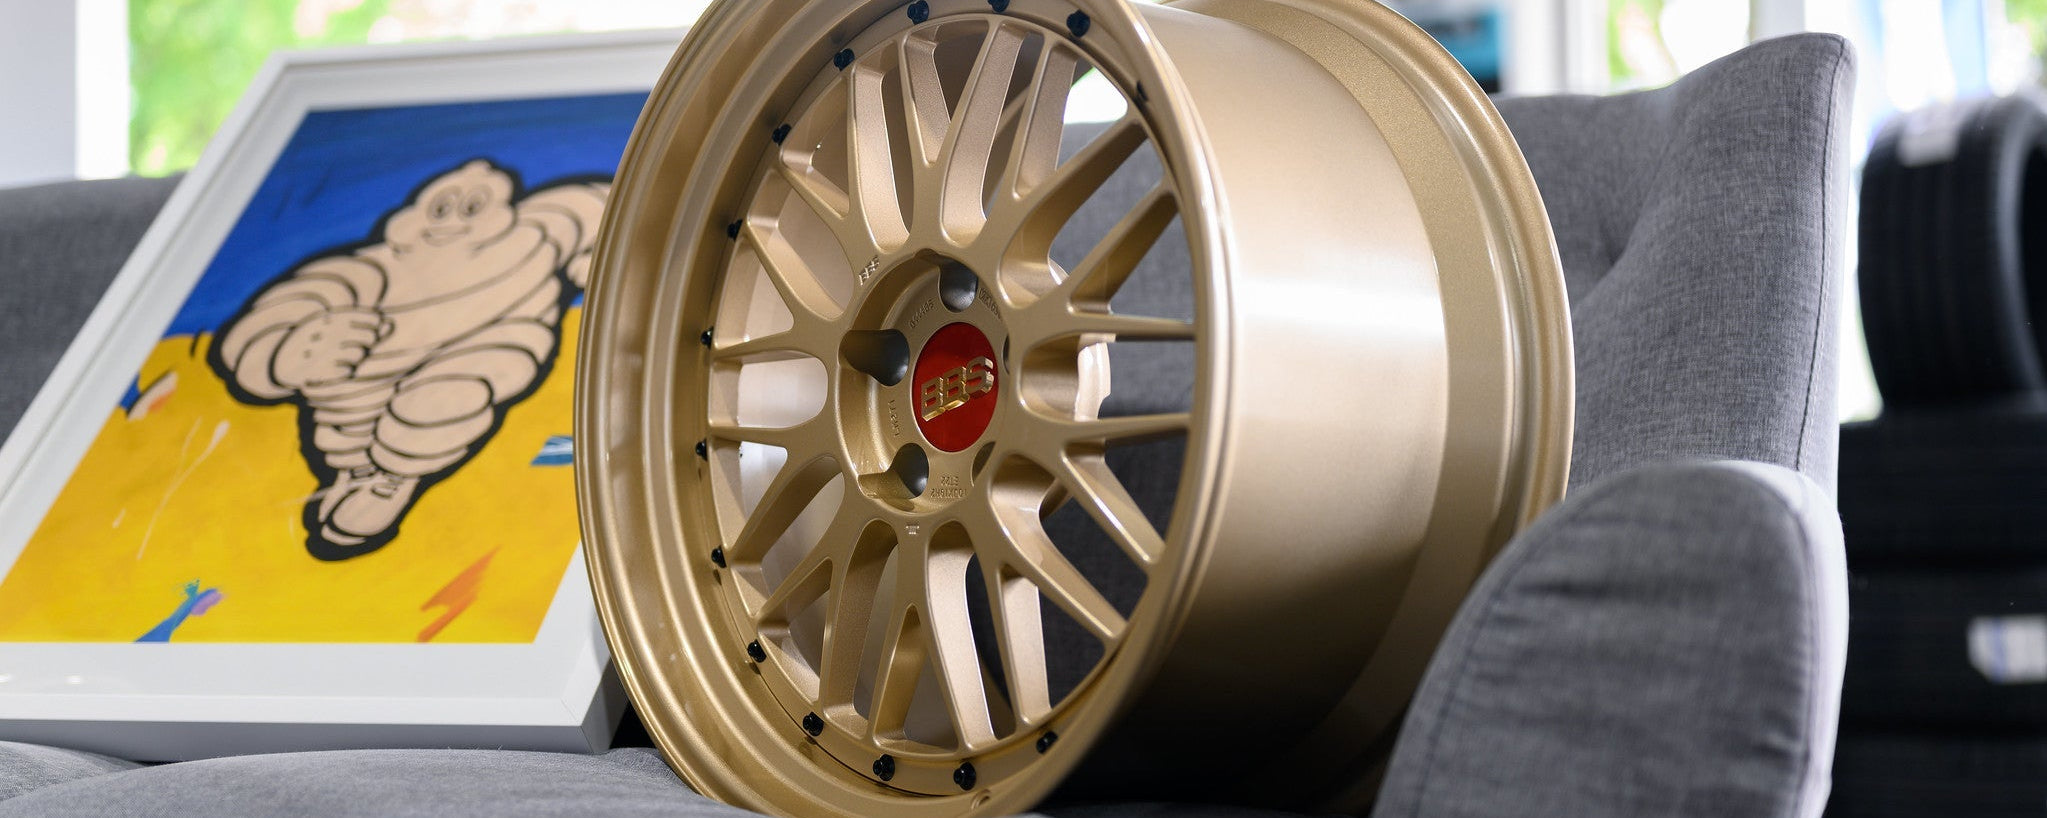 BBS LM F1 Championship Edition - Premium Wheels from BBS Japan - From just $8090.00! Shop now at MK MOTORSPORTS